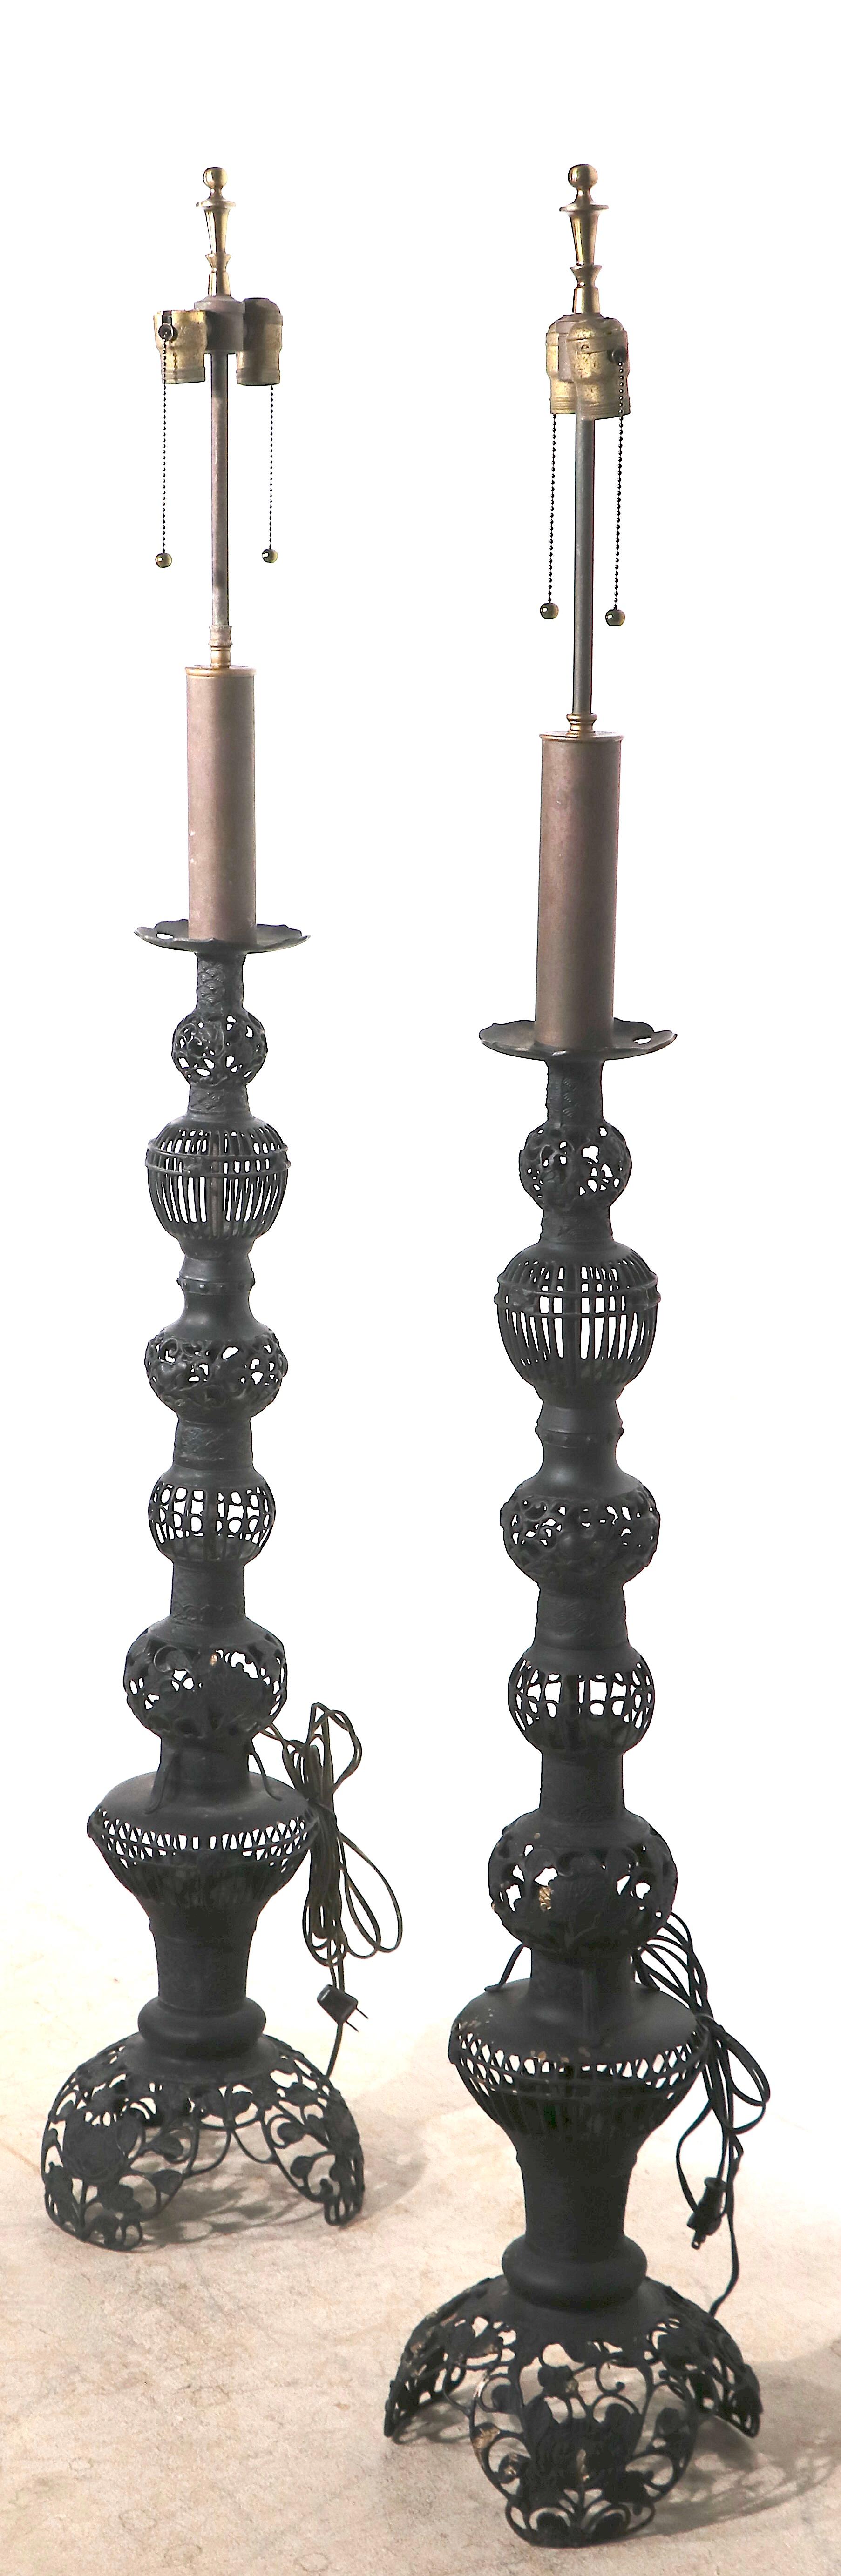 Pair of decorative floor lamps, having pierced metal foliate bodies, in alter black paint finish. Both are non working condition, and have been newly professionally rewired. Specific condition report as follows:
 One brass socket cap is missing,